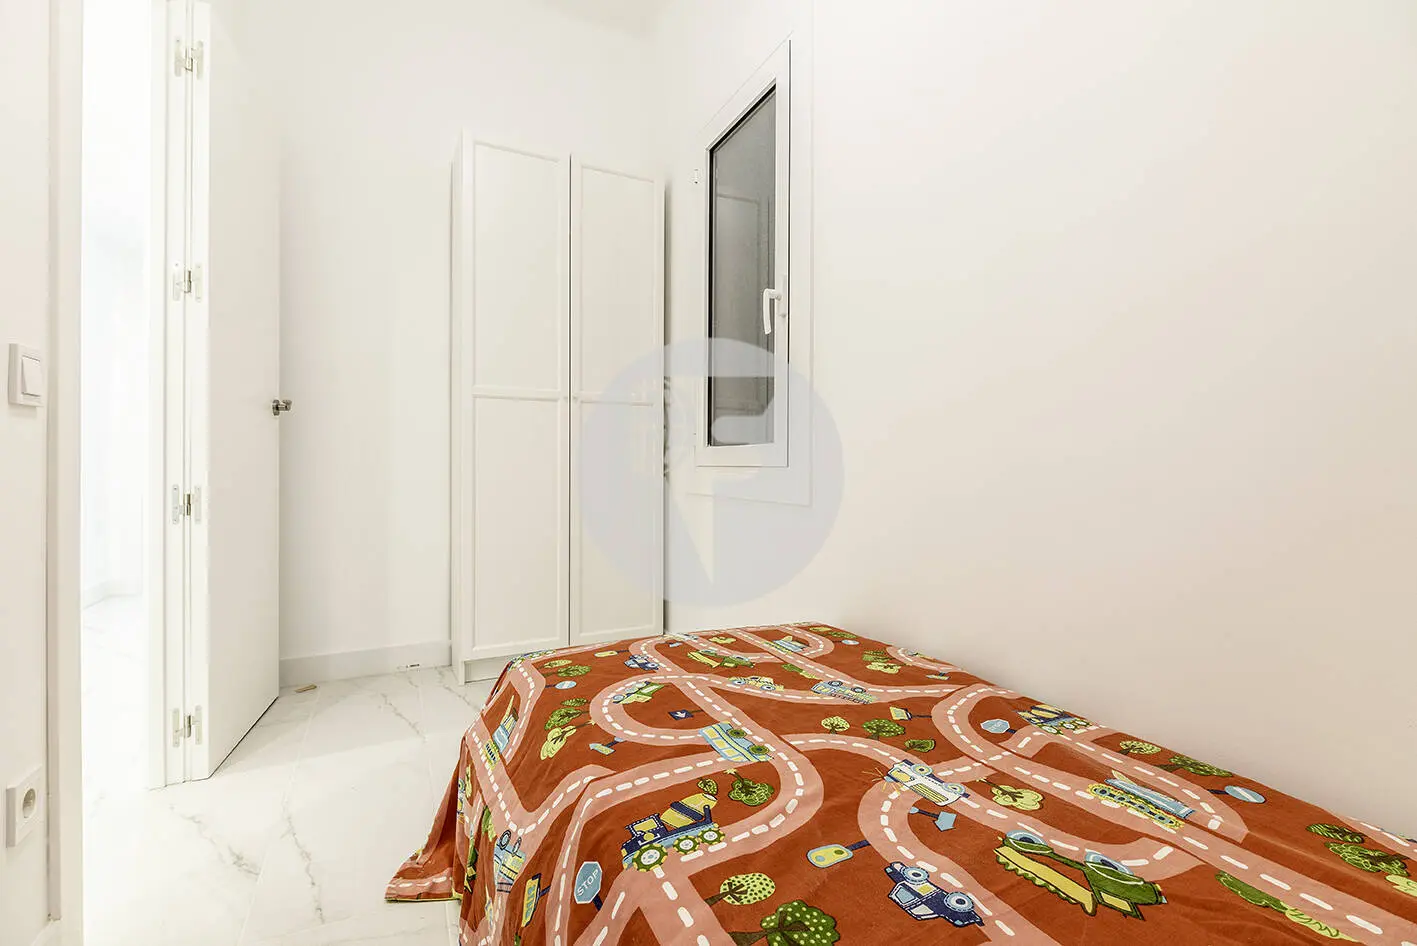 Brand new completely renovated apartment on Aragó street in the heart of El Clot in Barcelona. 21